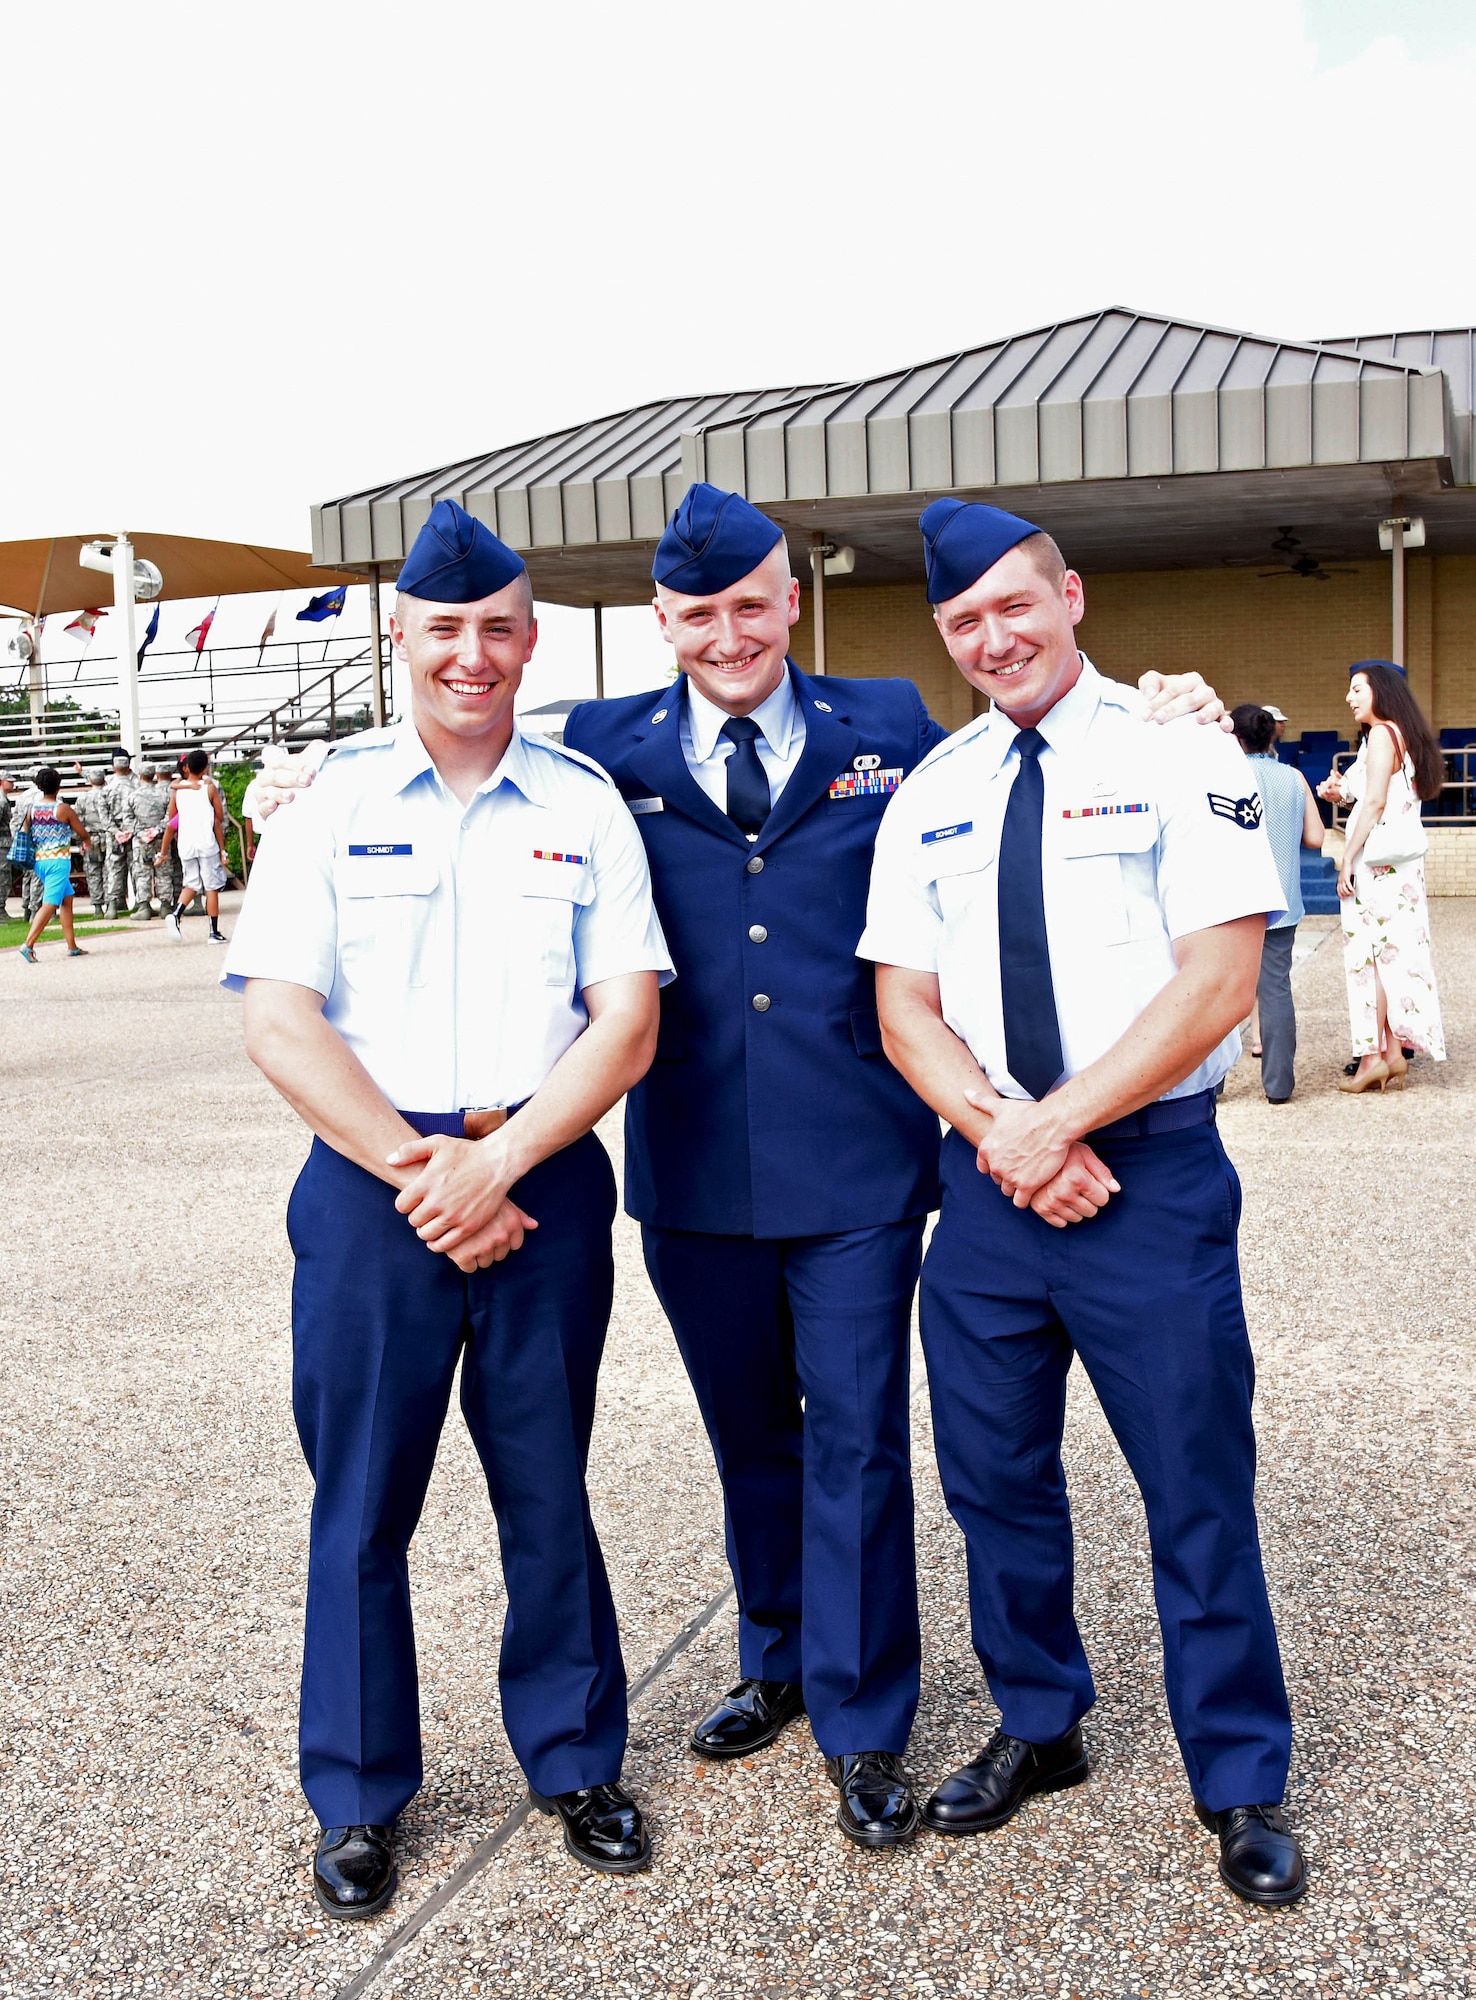 From left to right, Logan, Kendrick and Collin Schmidt pose for a photograph after a graduation ceremony at Joint Base San Antonio, Texas, June 26. Logan was the most recent graduate of Air Force basic training and the final Schmidt brother to join the Air Force. (Courtesy photo Airman 1st Class Collin Schmidt)